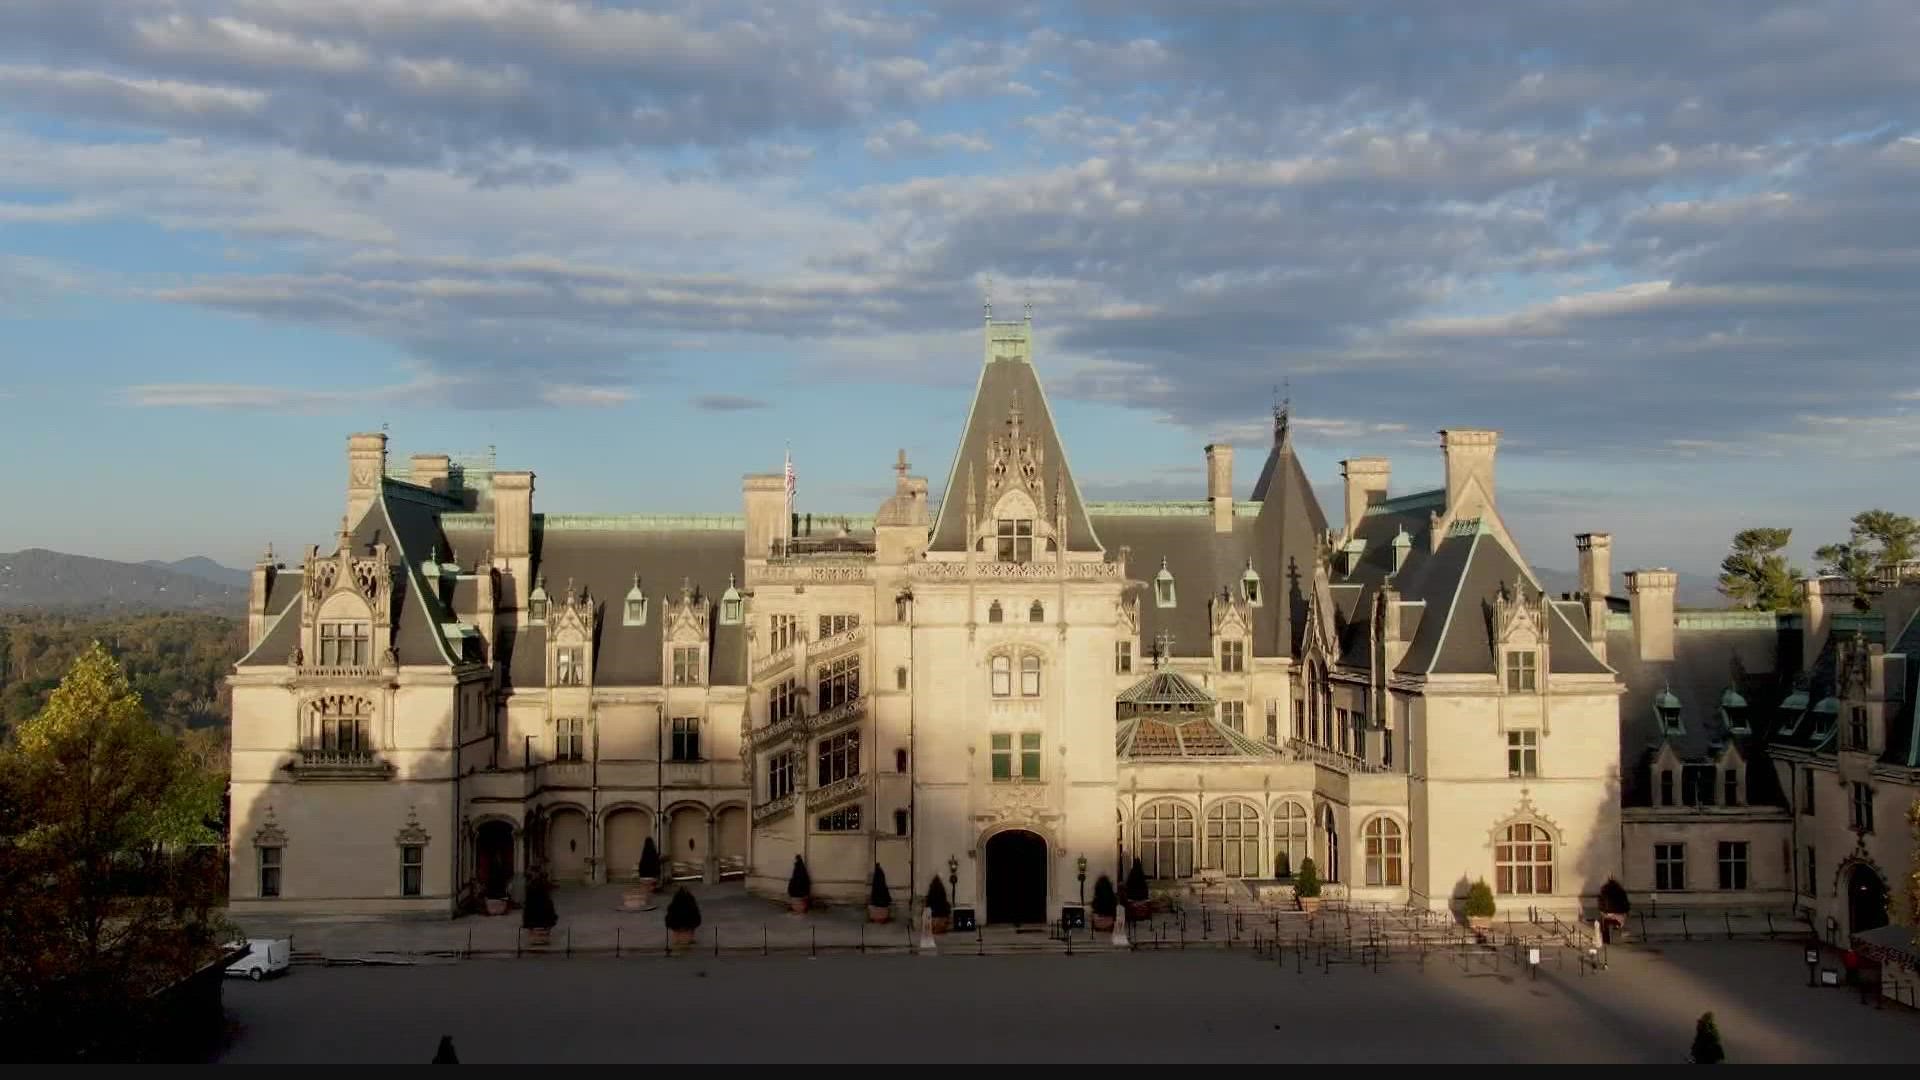 Asheville is home to America's largest house with 35 bedrooms, 43 bathrooms, 65 fireplaces and much more.